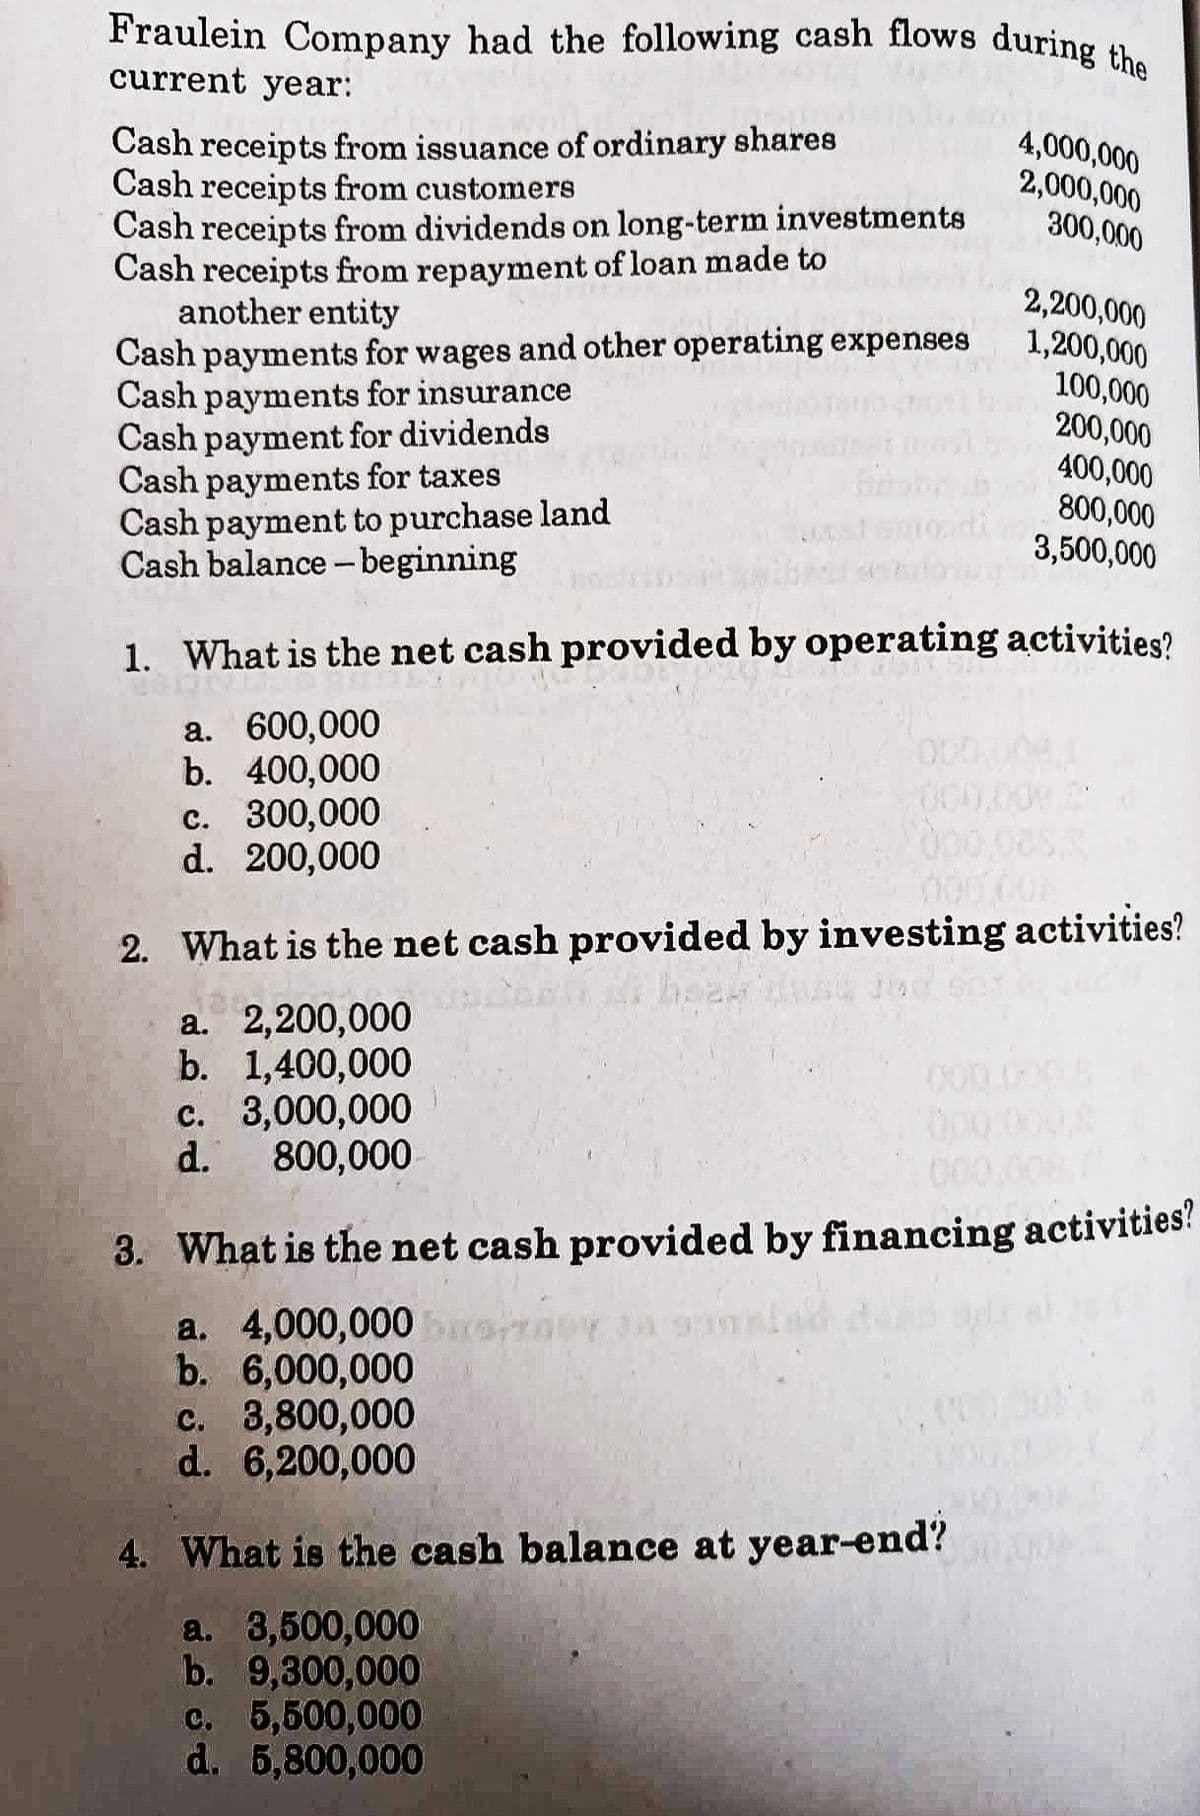 Fraulein Company had the following cash flows during the
current year:
4,000,000
Cash receipts from issuance of ordinary shares
Cash receipts from customers
2,000,000
300,000
Cash receipts from dividends on long-term investments
Cash receipts from repayment of loan made to
2,200,000
another entity
1,200,000
Cash payments for wages and other operating expenses
100,000
Cash payments for insurance
200,000
400,000
Cash payment for dividends
Cash payments for taxes
Cash payment to purchase land
800,000
3,500,000
Cash balance-beginning
1. What is the net cash provided by operating activities?
a. 600,000
b. 400,000
c. 300,000
000,005,8
d. 200,000
2. What is the net cash provided by investing activities?
a. 2,200,000
b. 1,400,000
c. 3,000,000
000.000,0
d. 800,000
000,008,
3. What is the net cash provided by financing activities?
a. 4,000,000 busy an
b. 6,000,000
c. 3,800,000
d. 6,200,000
4. What is the cash balance at year-end?
a. 3,500,000
b. 9,300,000
c.
5,500,000
d. 5,800,000